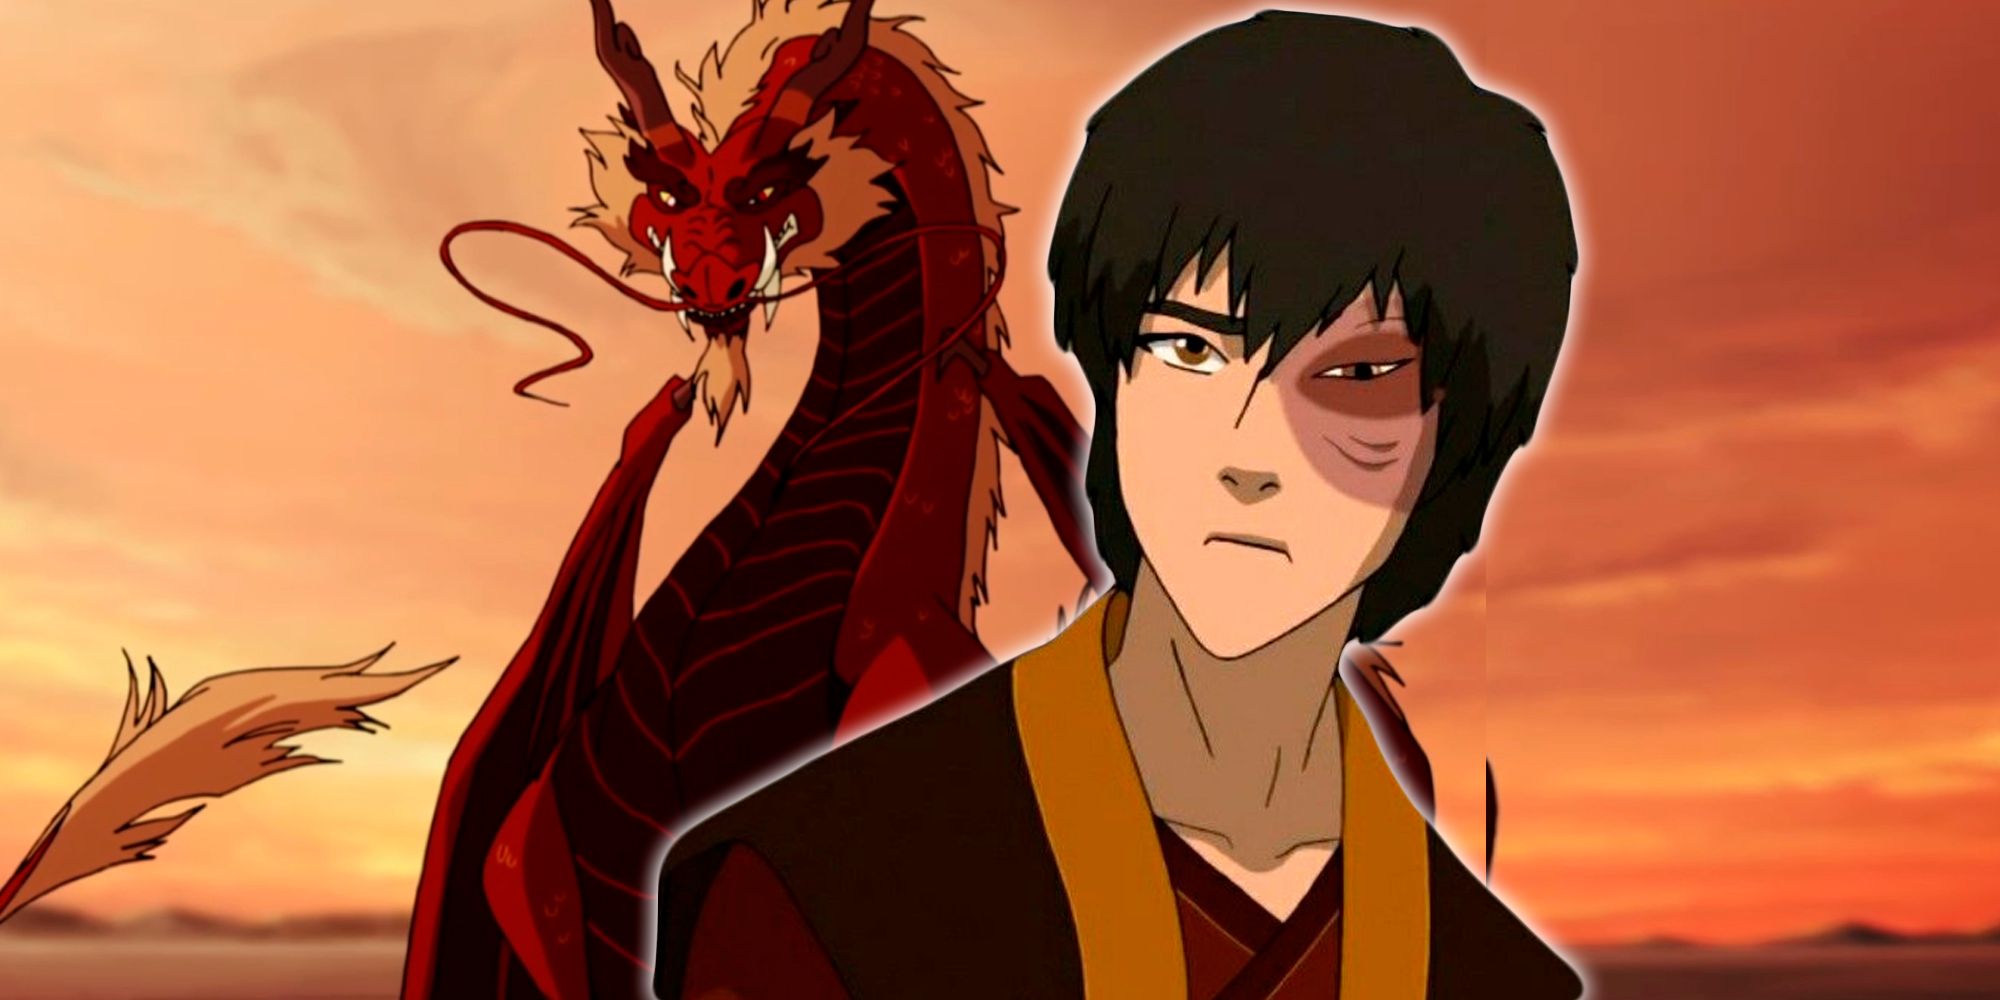 Zuko and his dragon Druk in The Legend of Korra and Avatar The Last Airbender